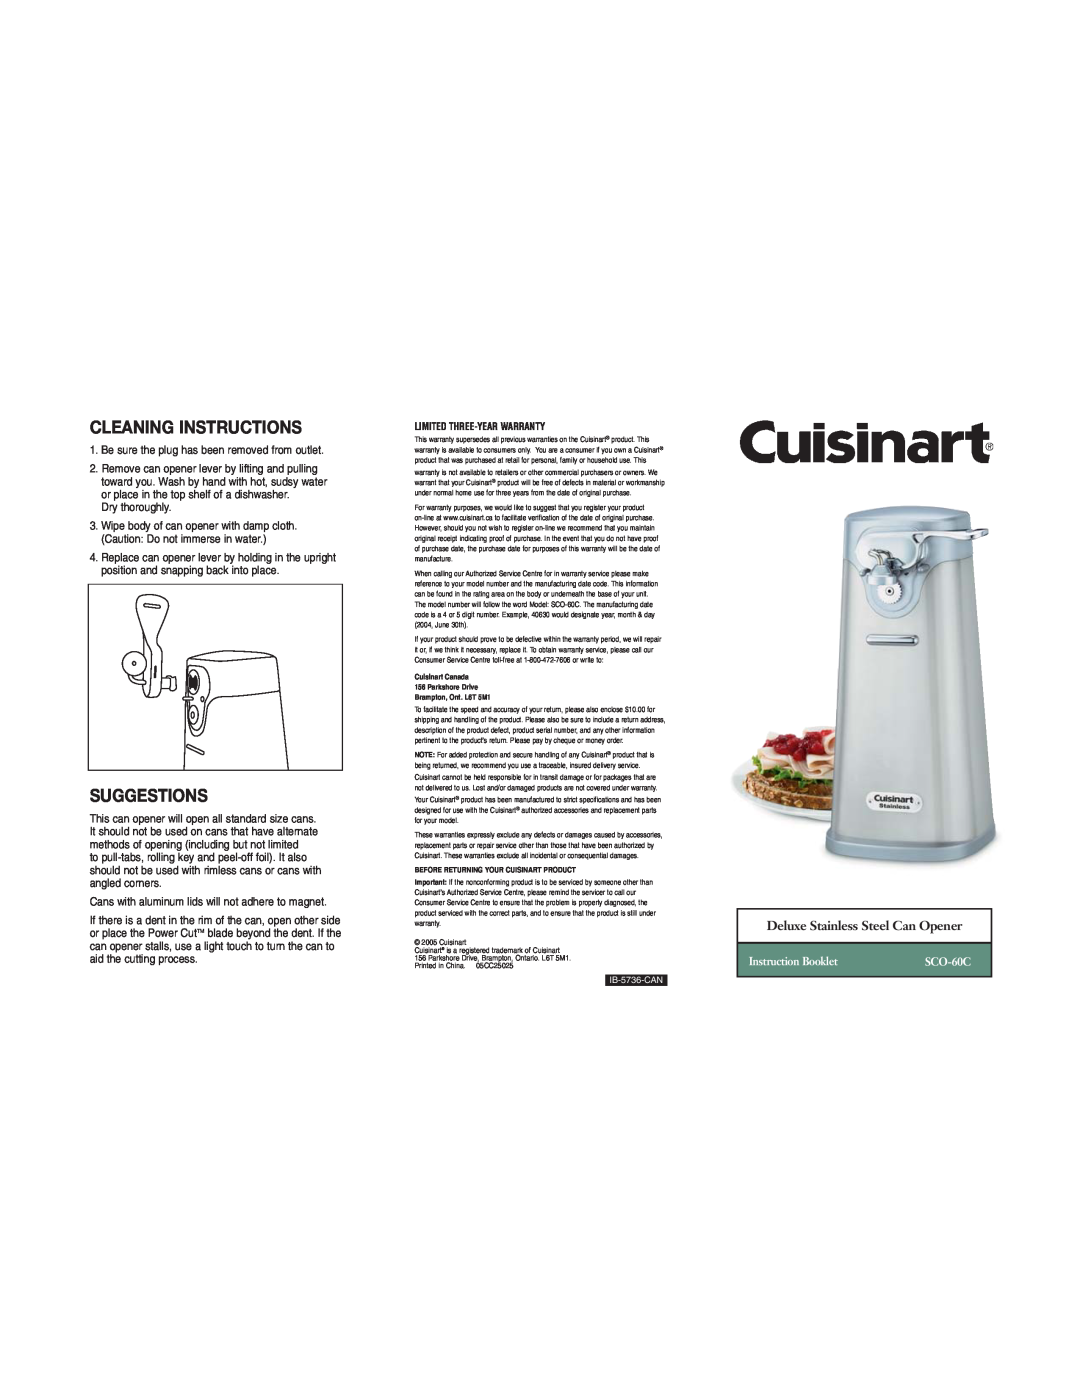 Cuisinart SCO-60C warranty Cleaning Instructions, Suggestions, Instruction Booklet, Deluxe Stainless Steel Can Opener 